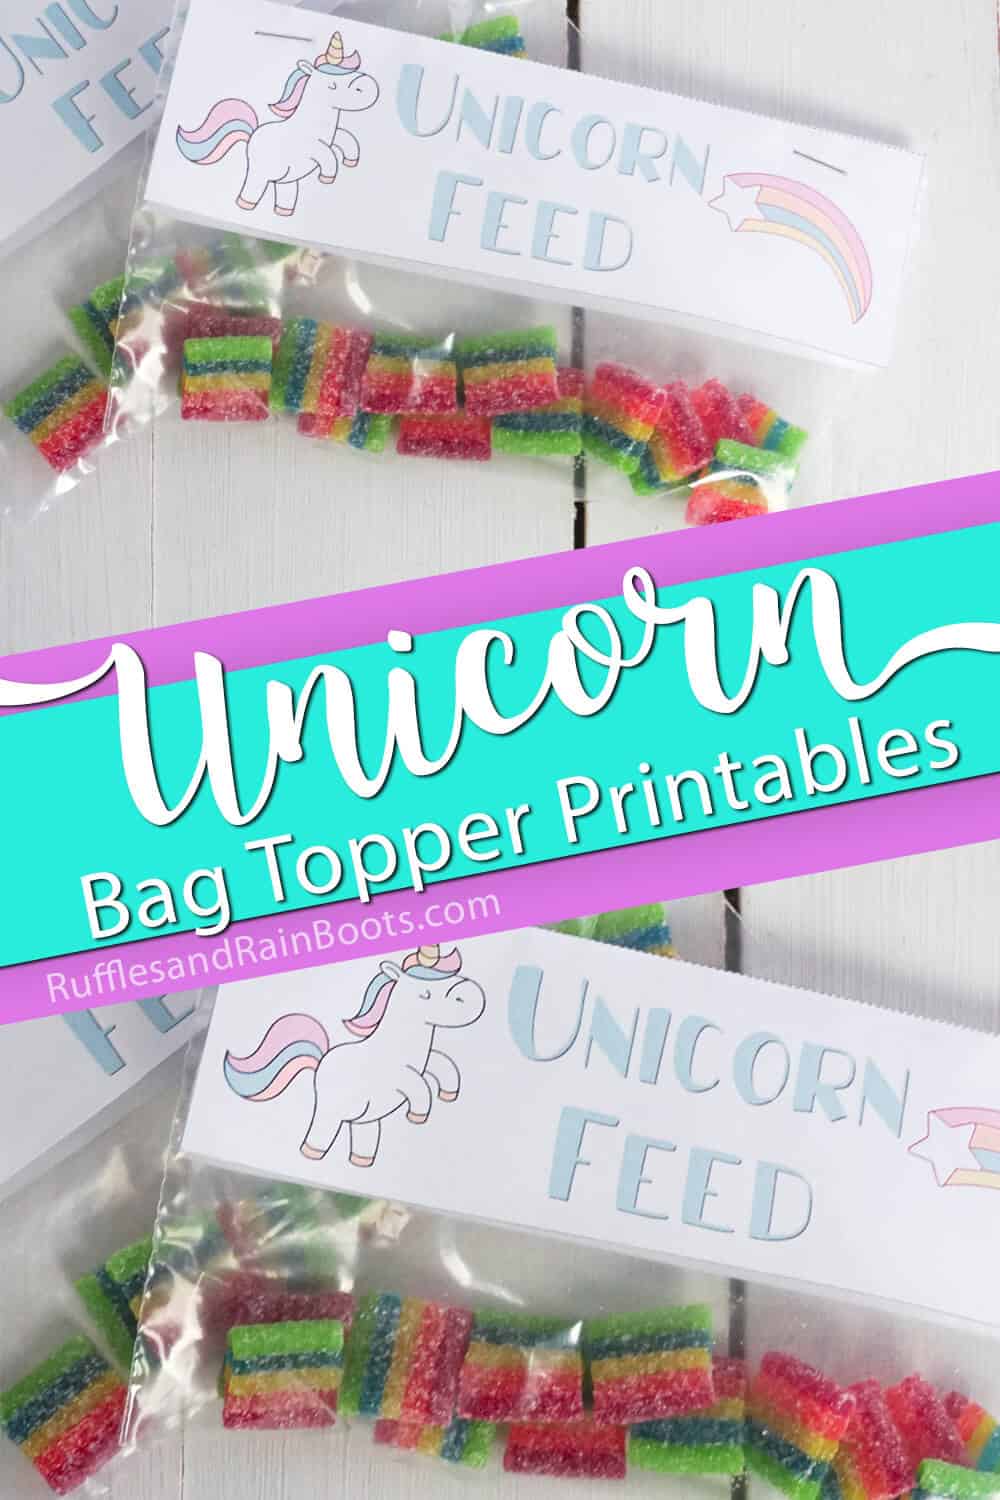 photo collage of unicorn party favor bag toppers with text which reads unicorn bag topper printables